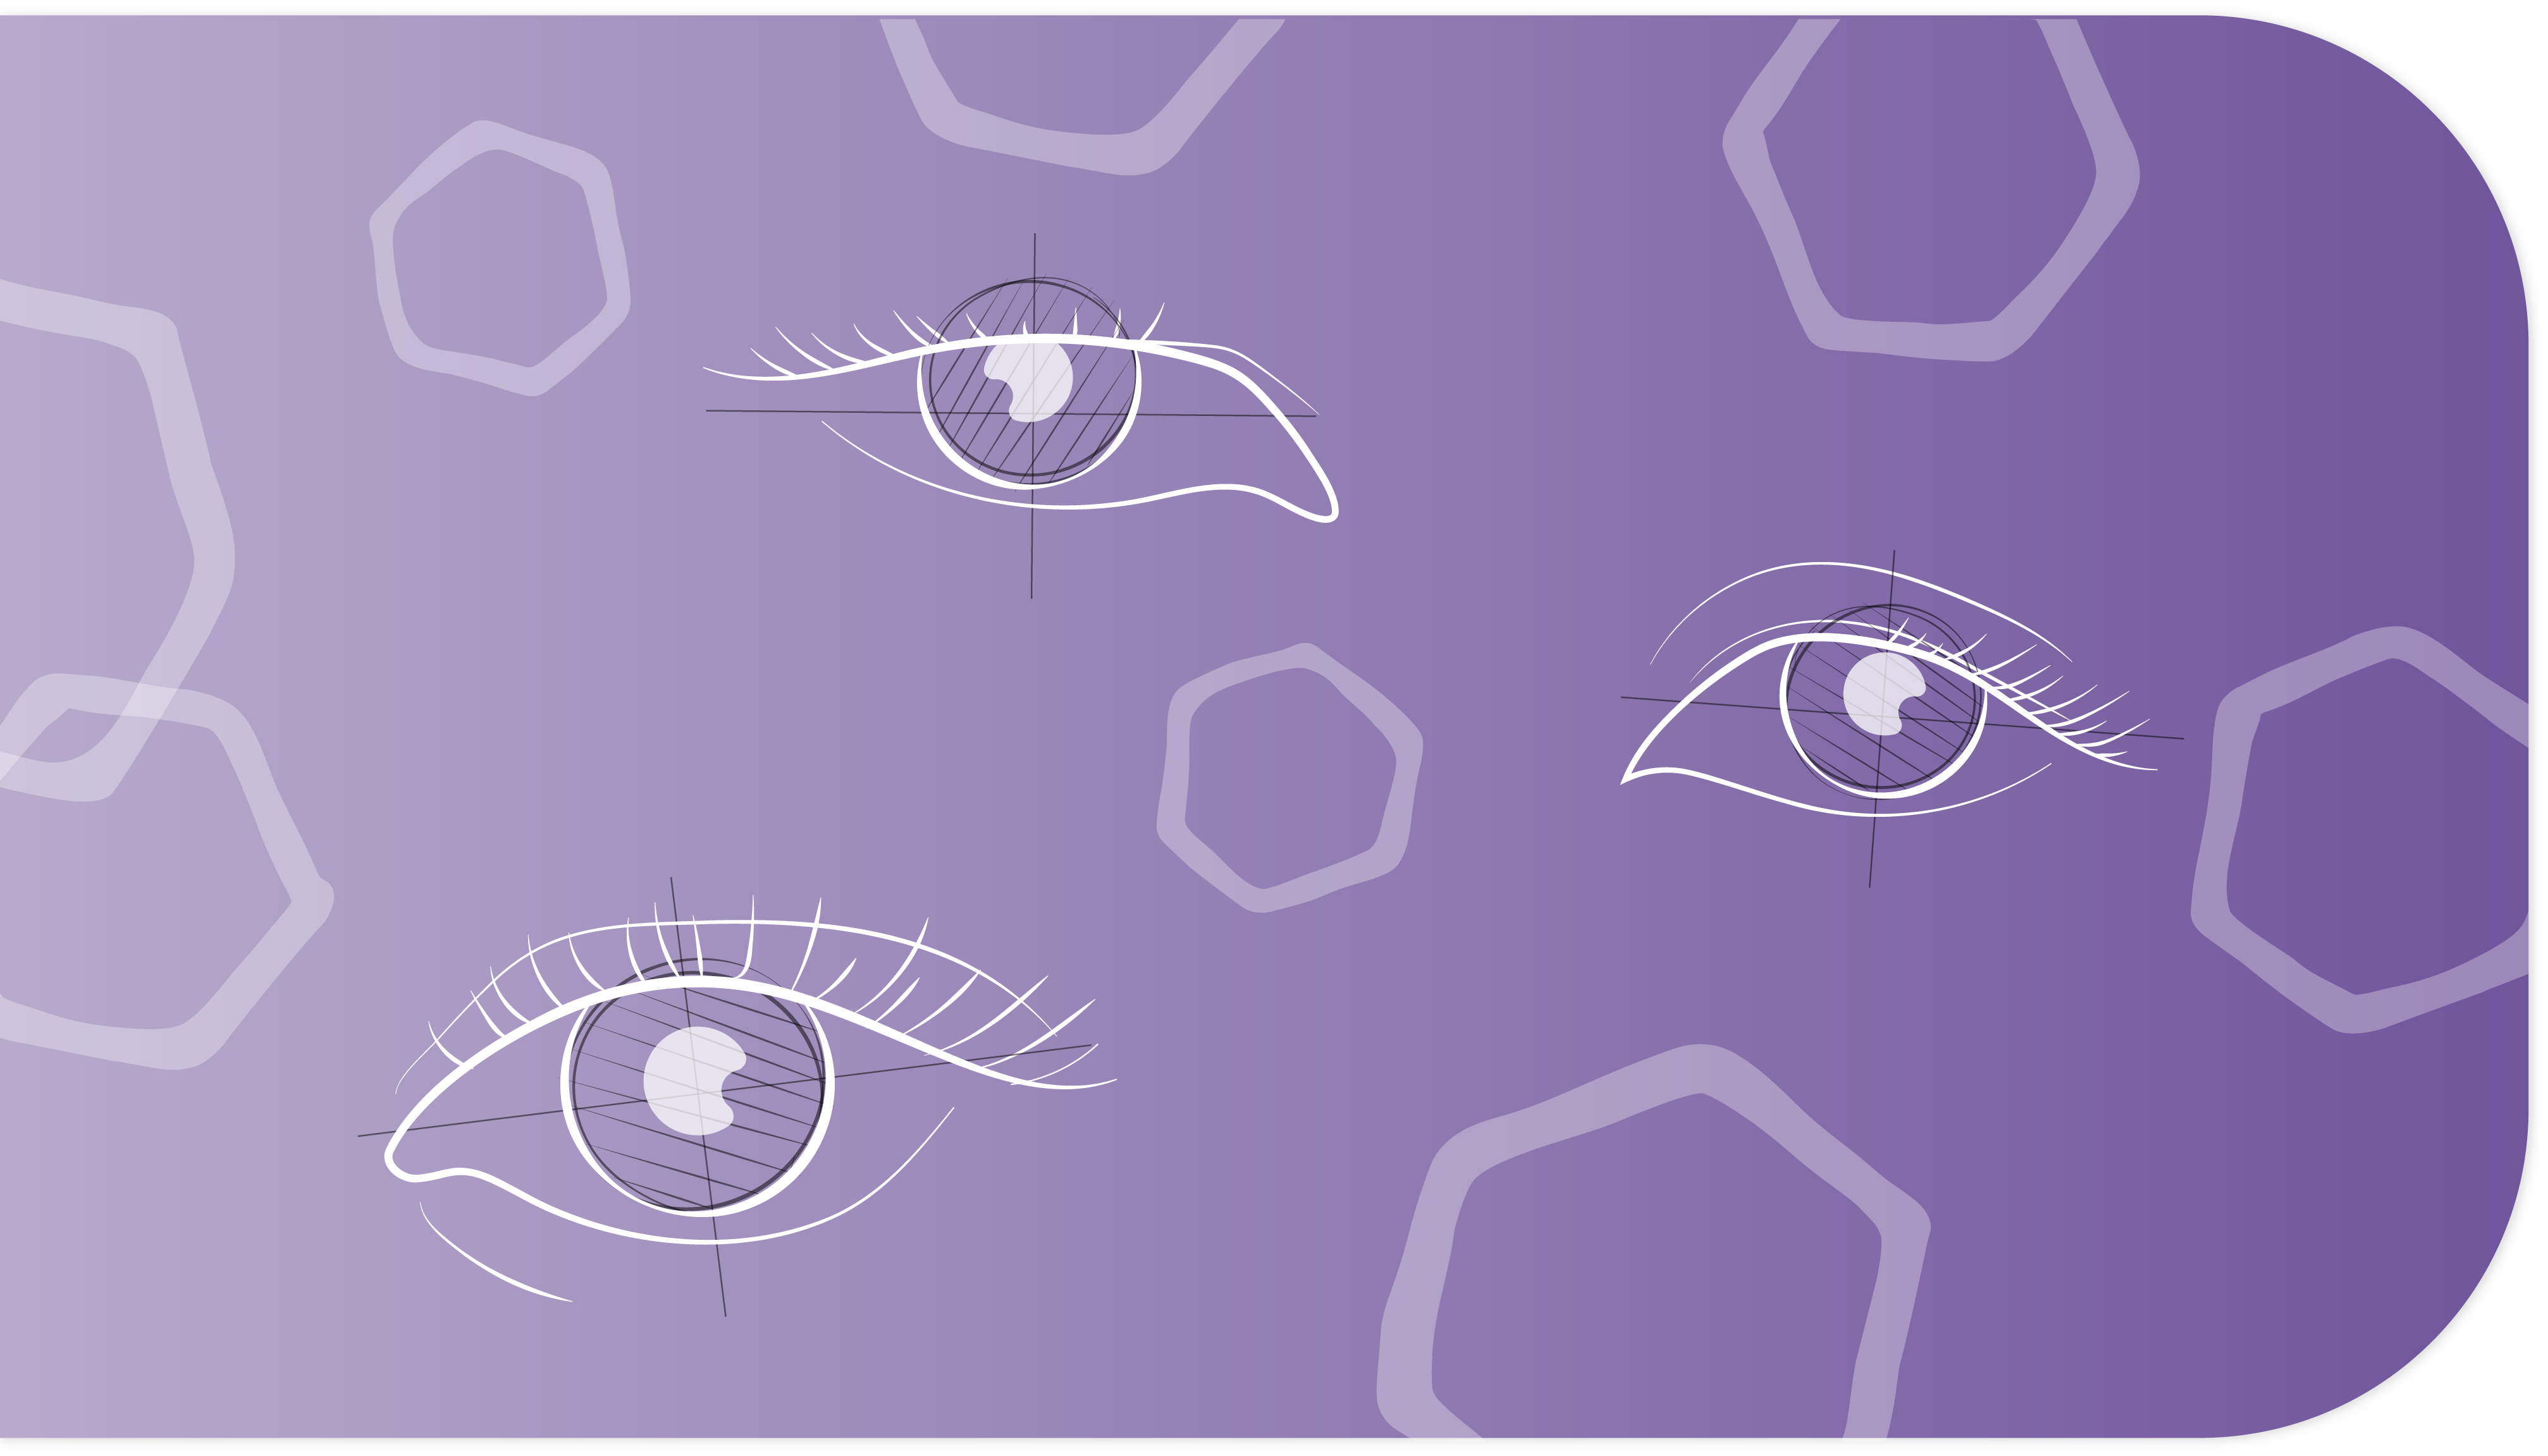 Chapter 3 banner indicating the start of a new chapter. Purple background with three eye icons.